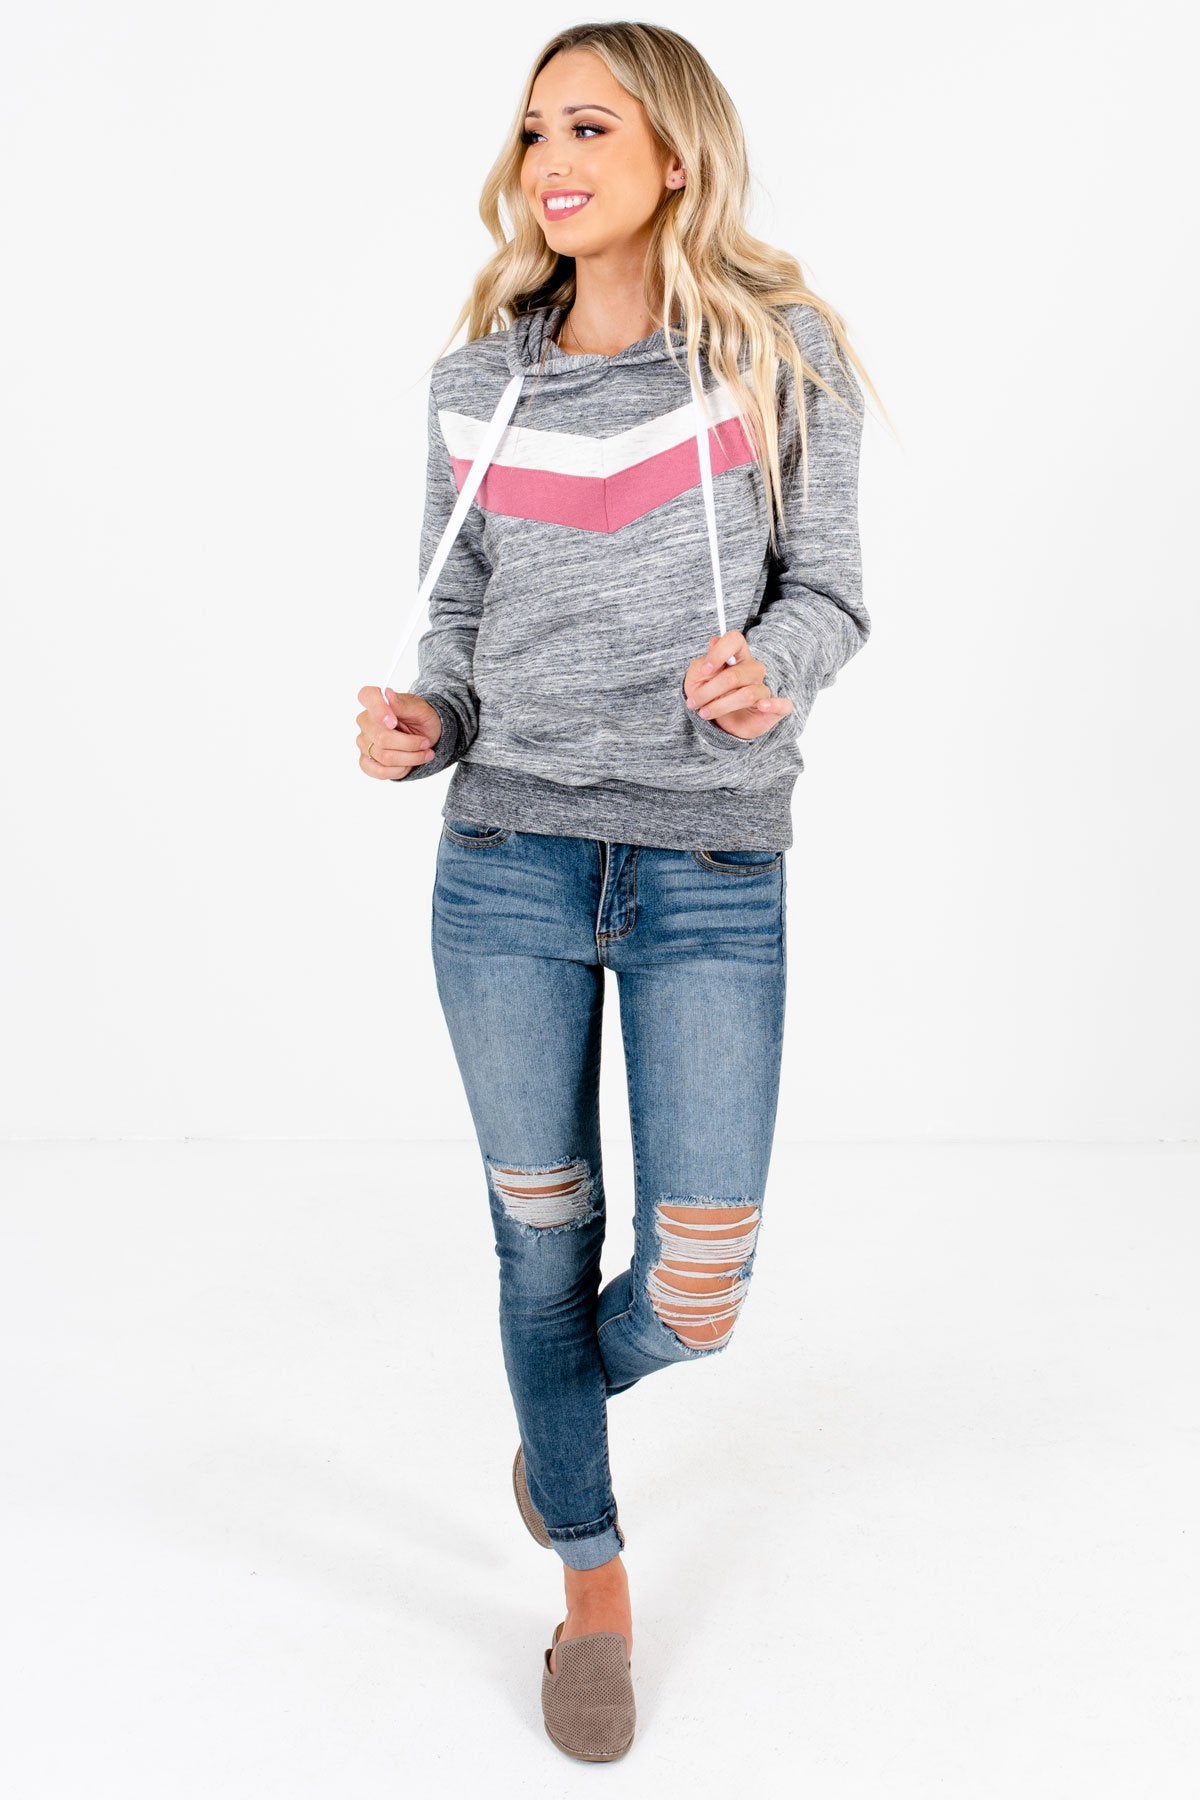 Women’s Heather Gray Fall and Winter Boutique Clothing